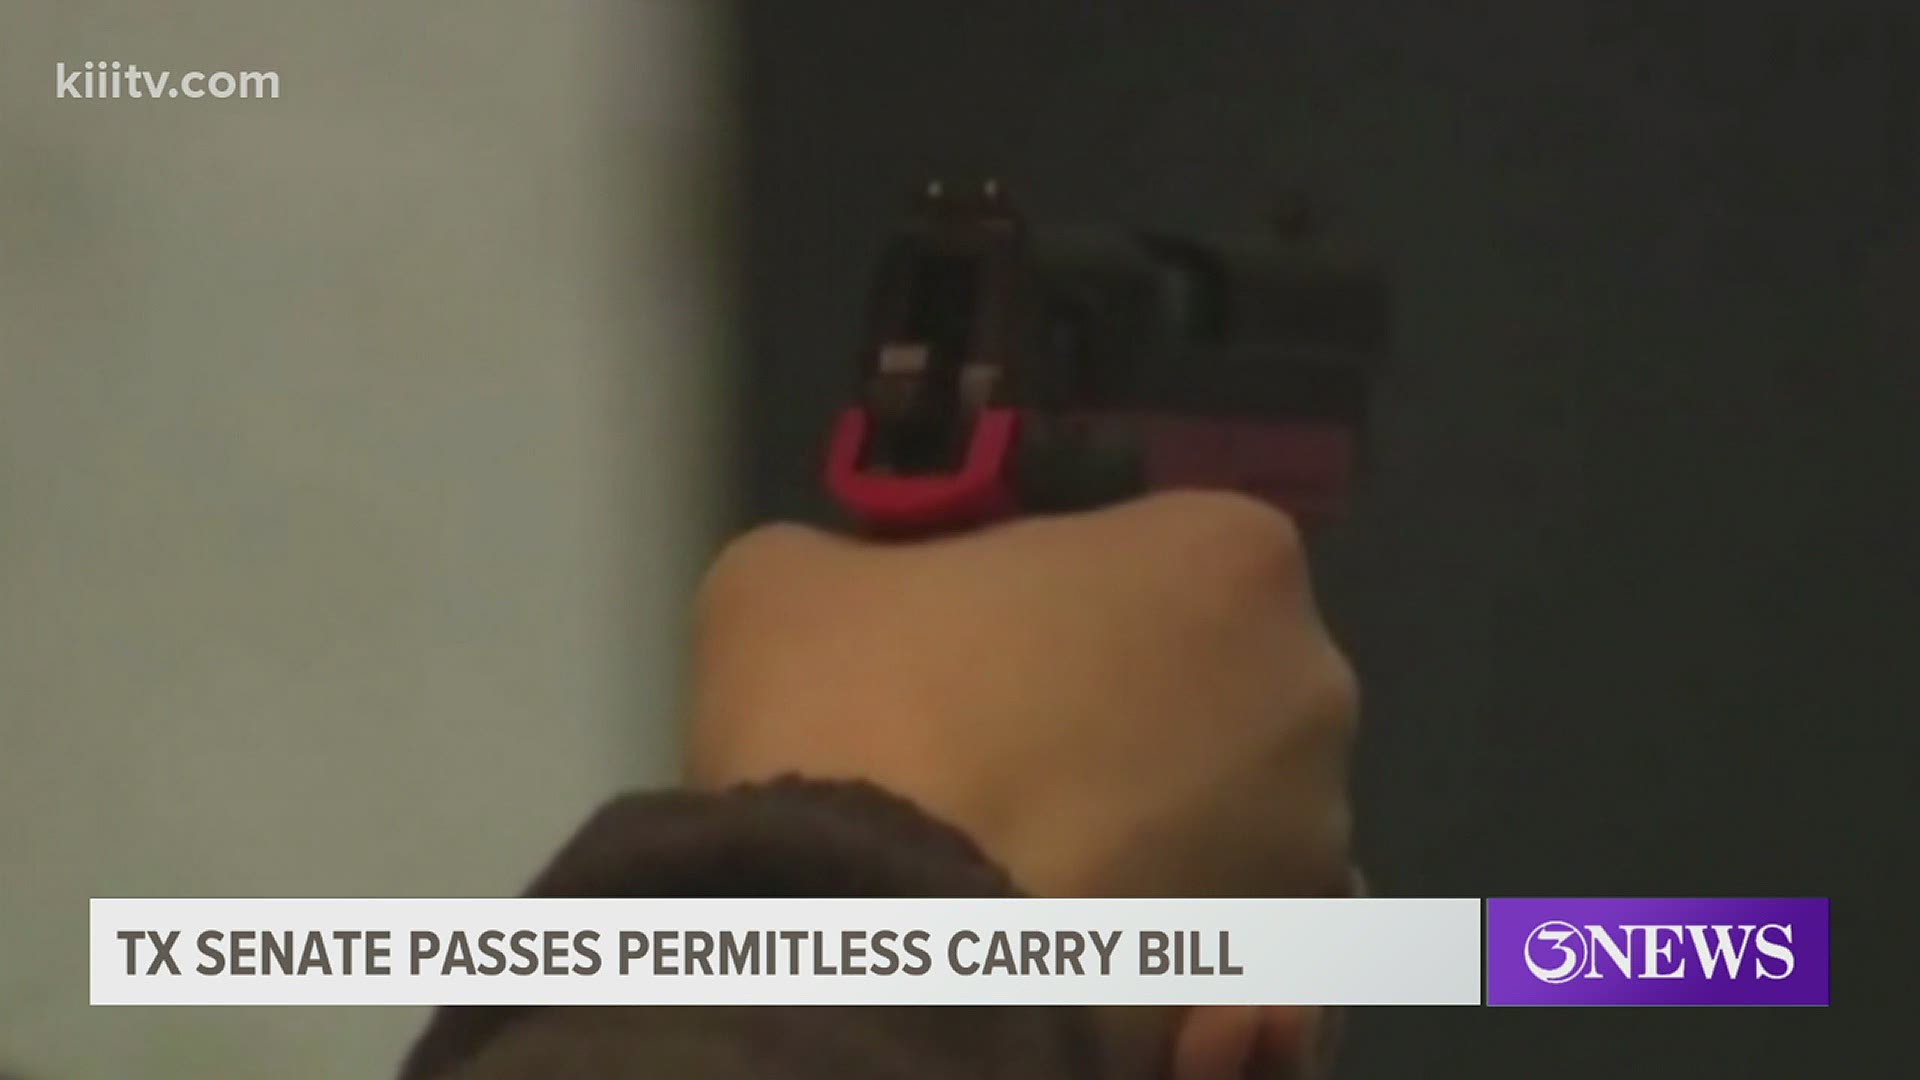 Texans could carry handguns without a permit under a new bill.